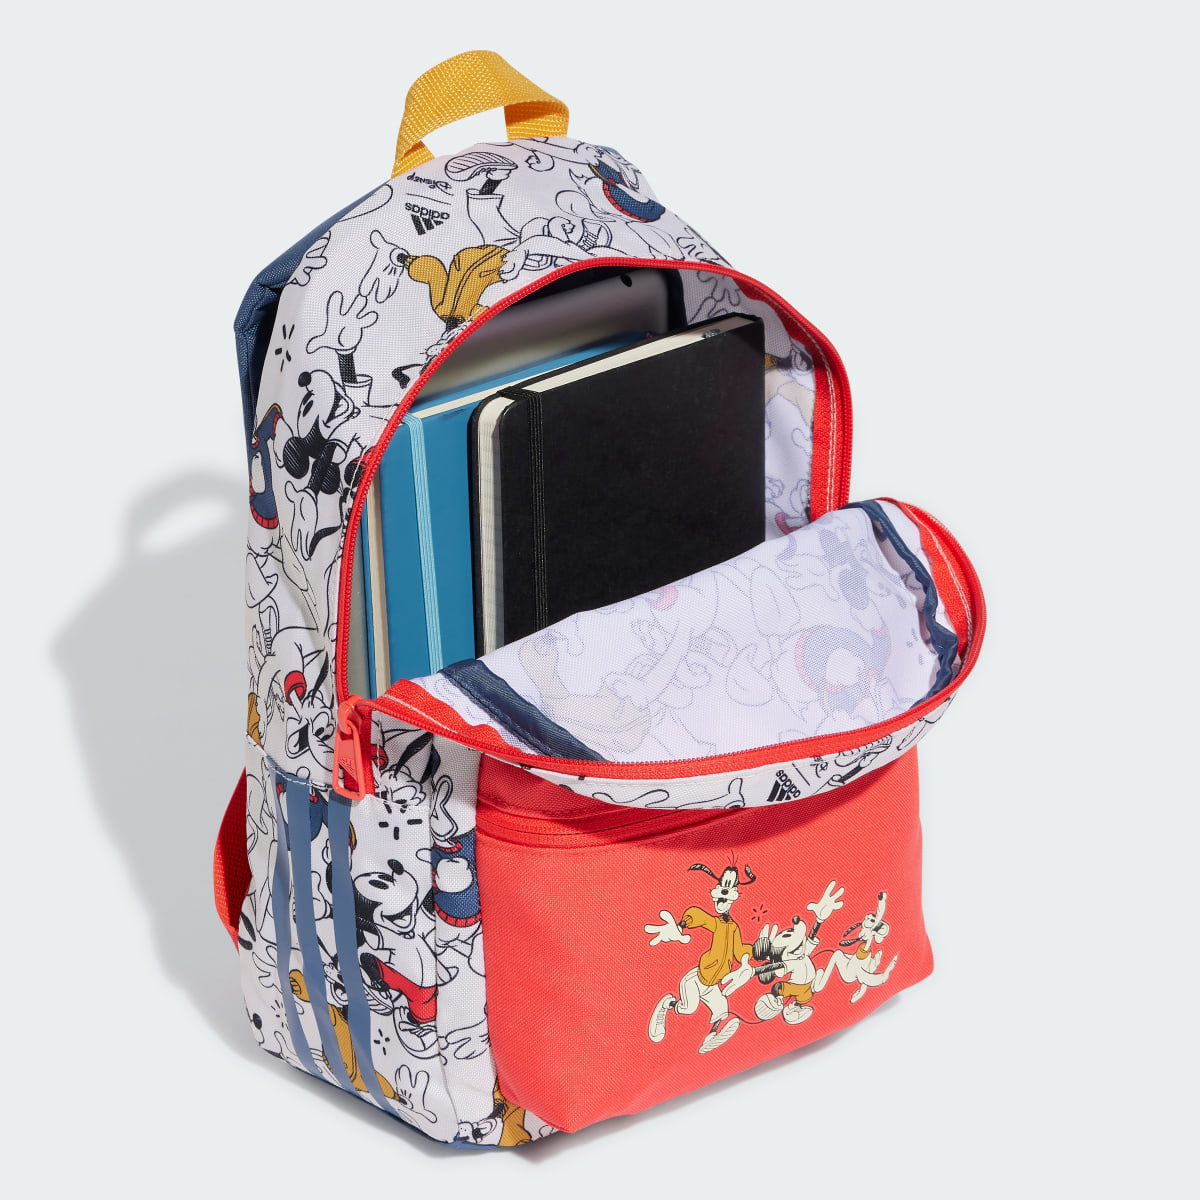 Adidas Disney's Mickey Mouse Backpack. 5